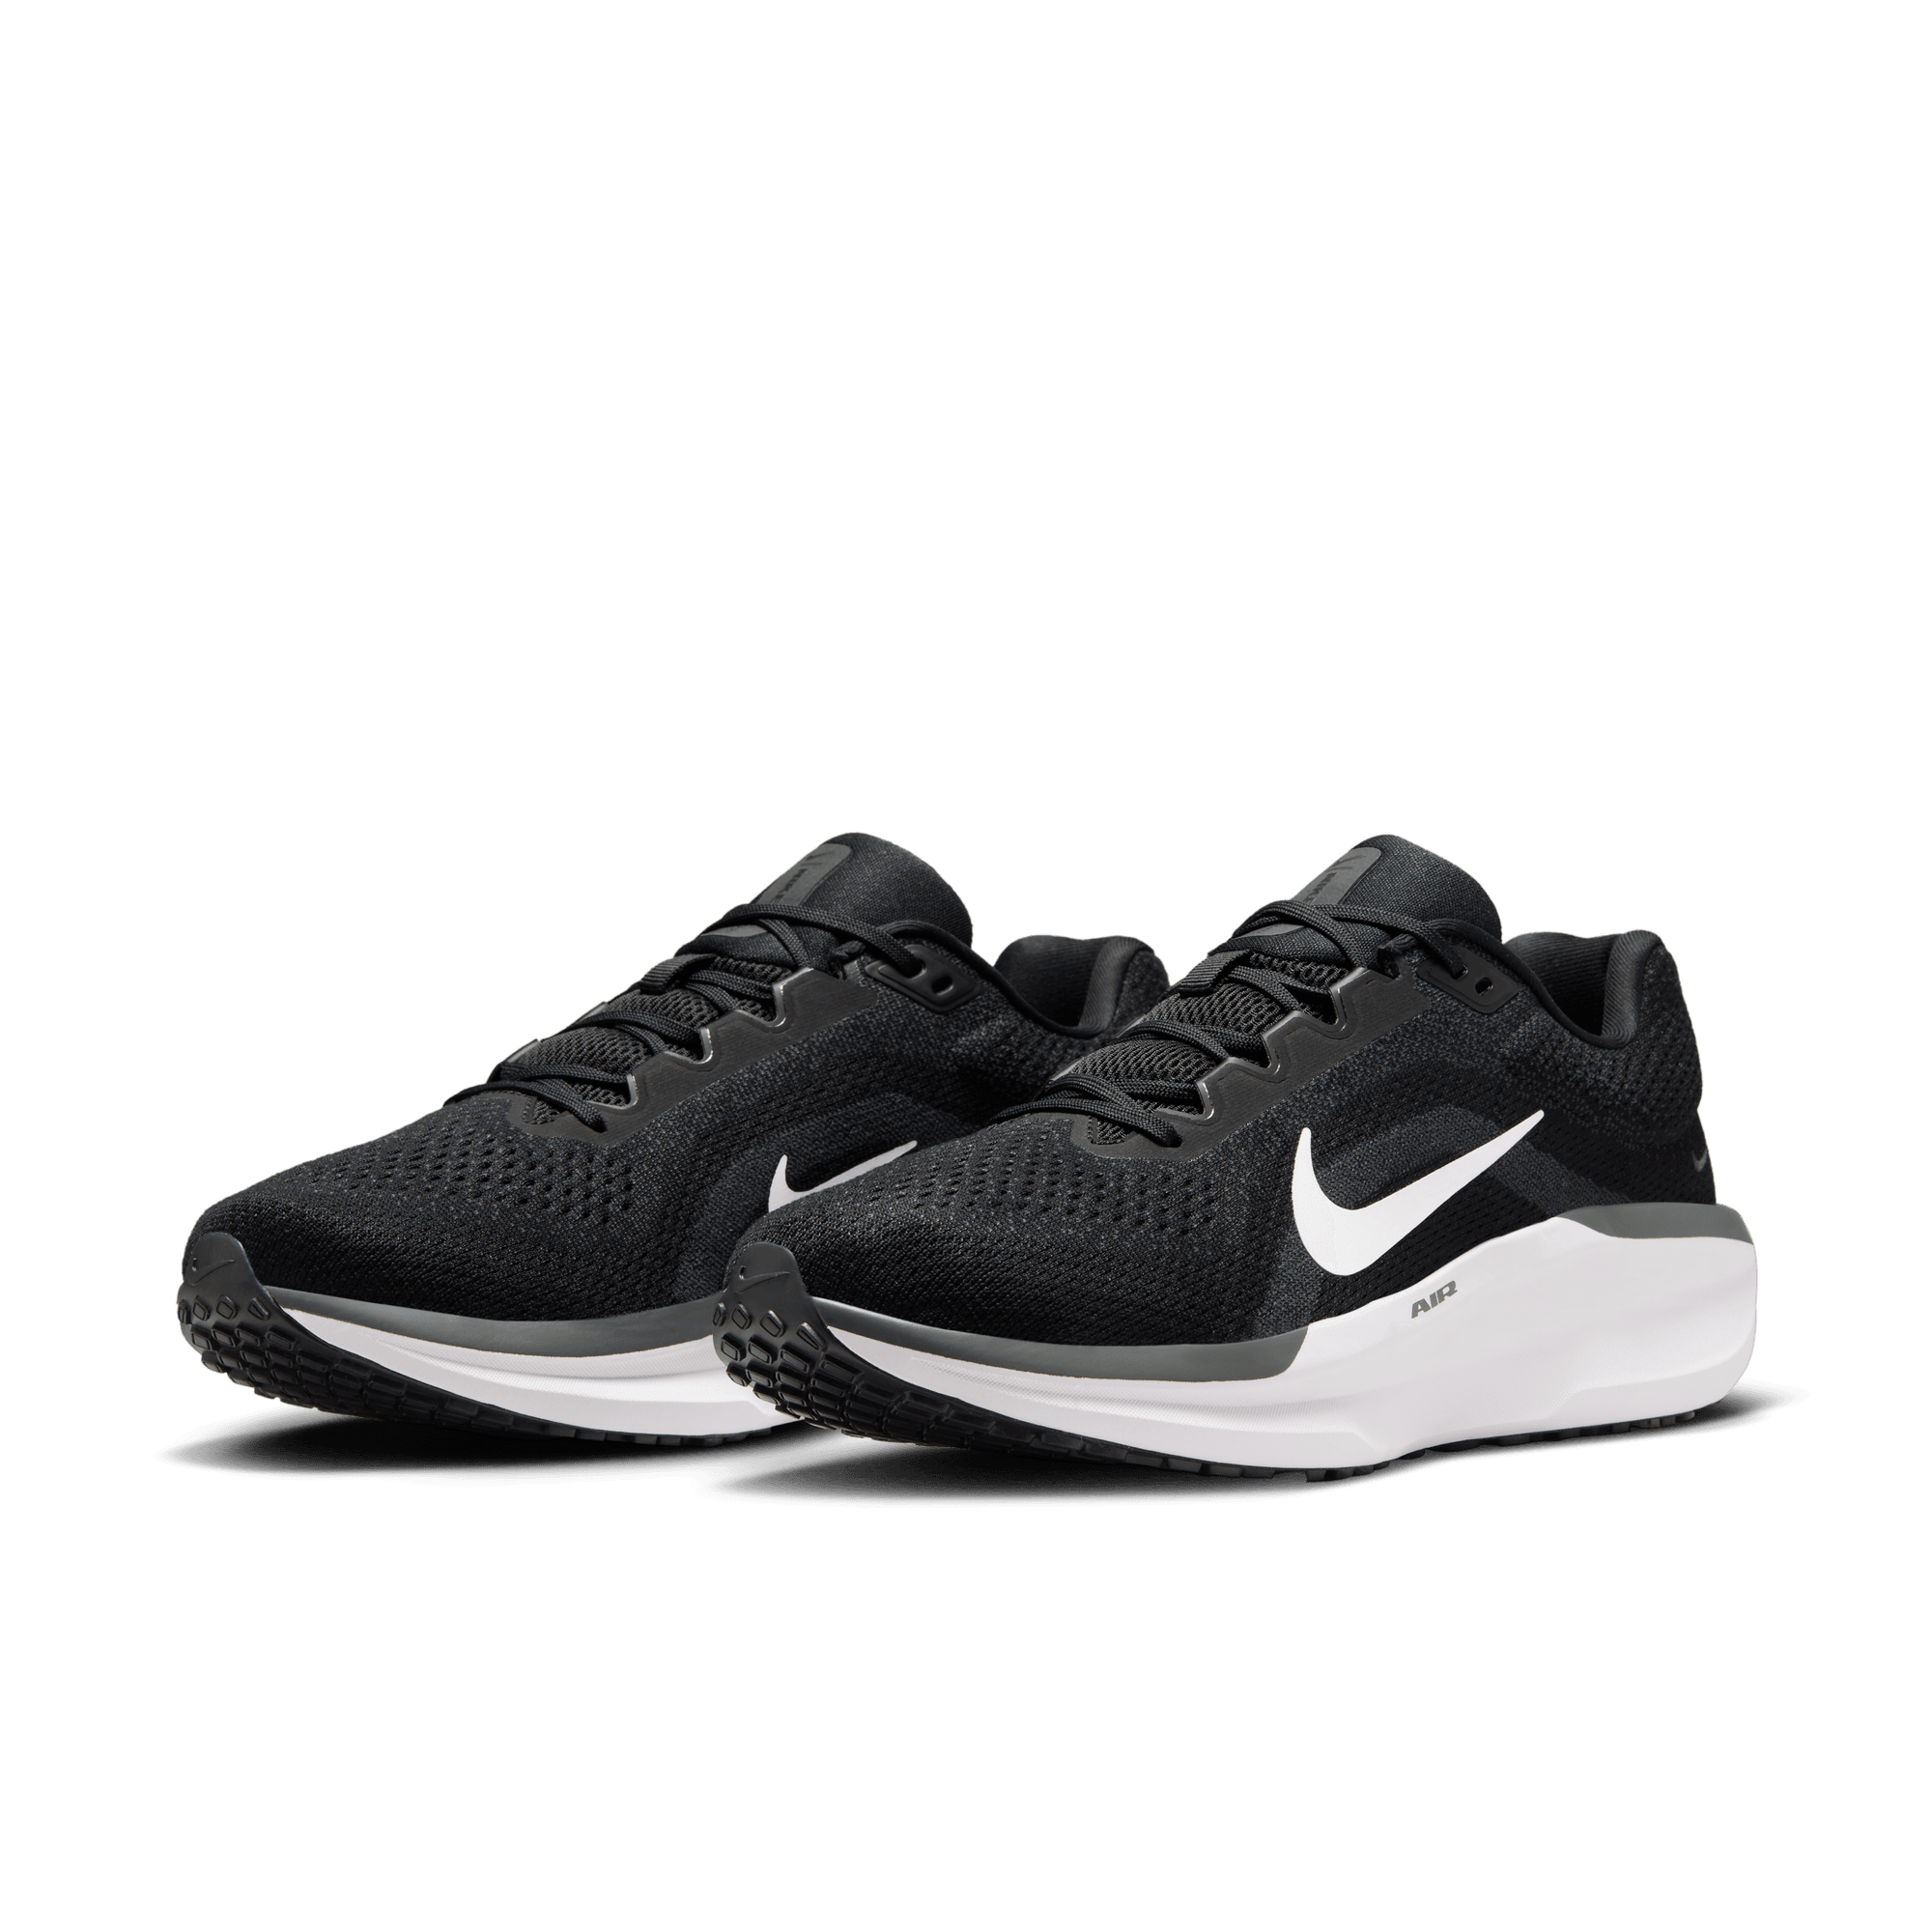 NIKE WINFLO 11 MENS ROAD RUNNING SHOES